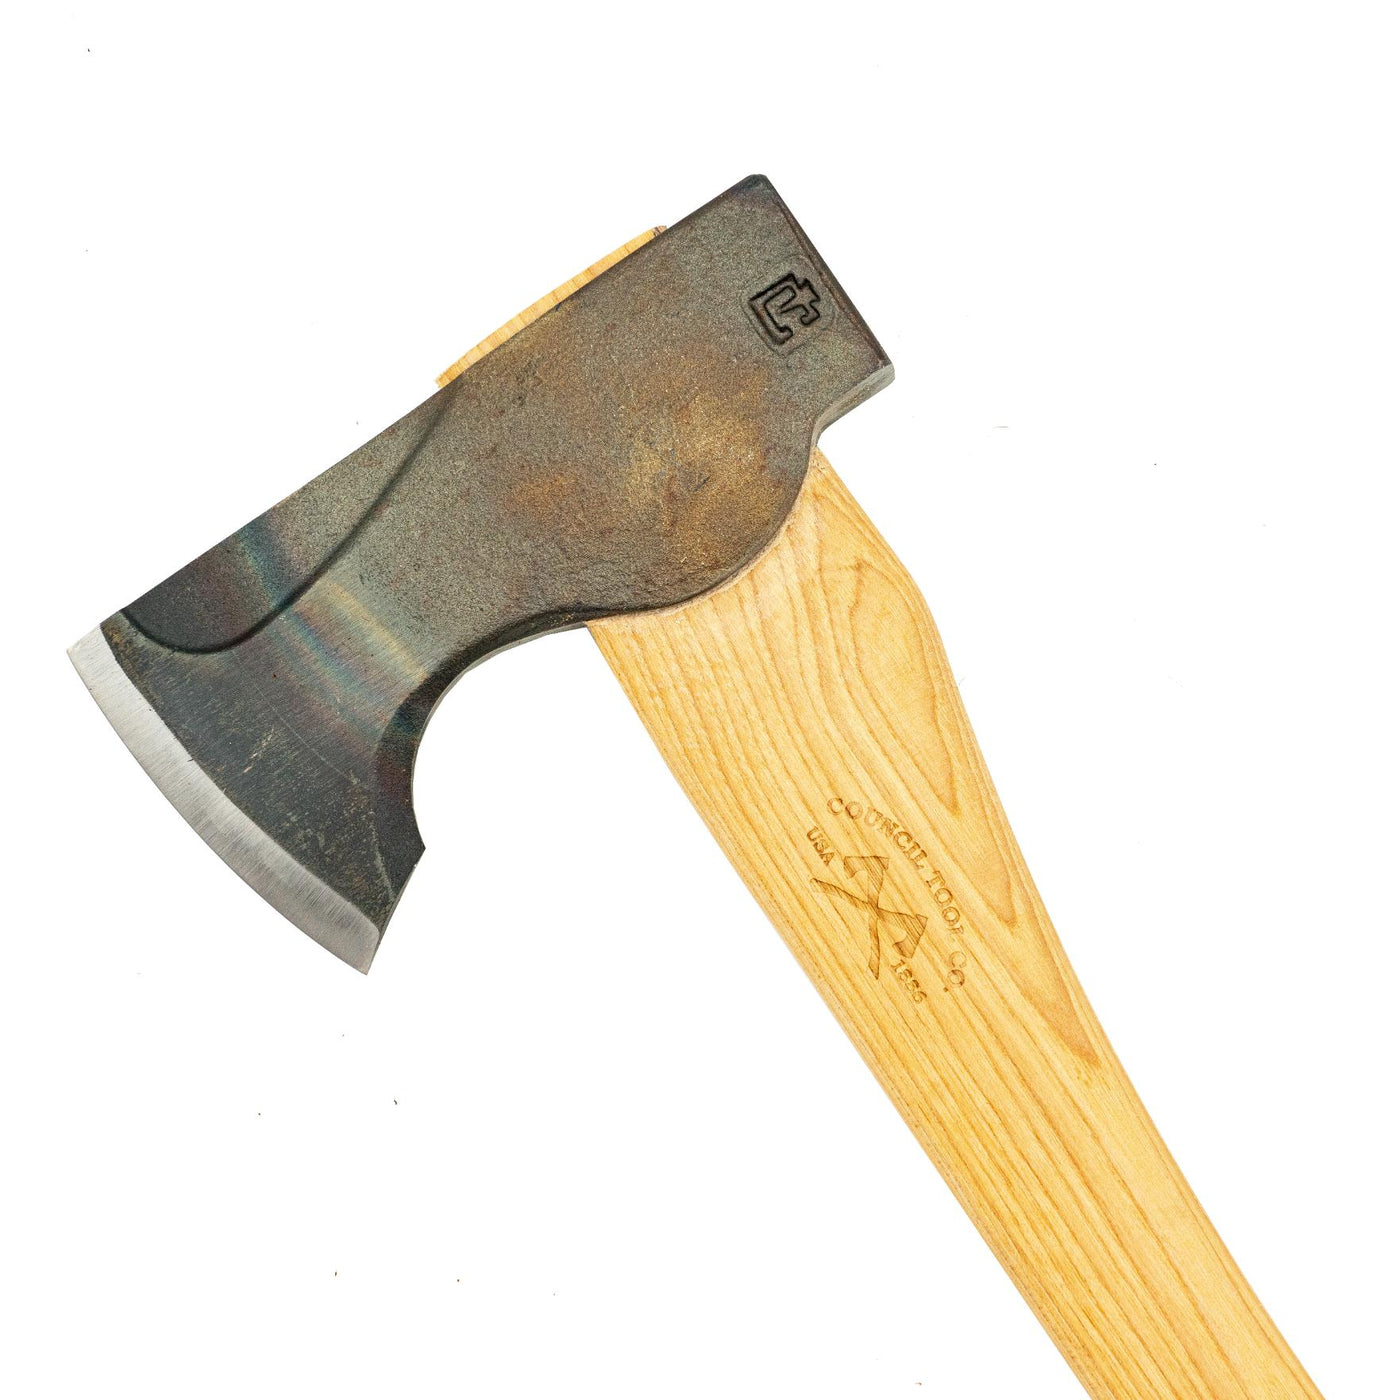 2 lbs. Wood-Craft Pack Axe, 24 in. Curved Handle